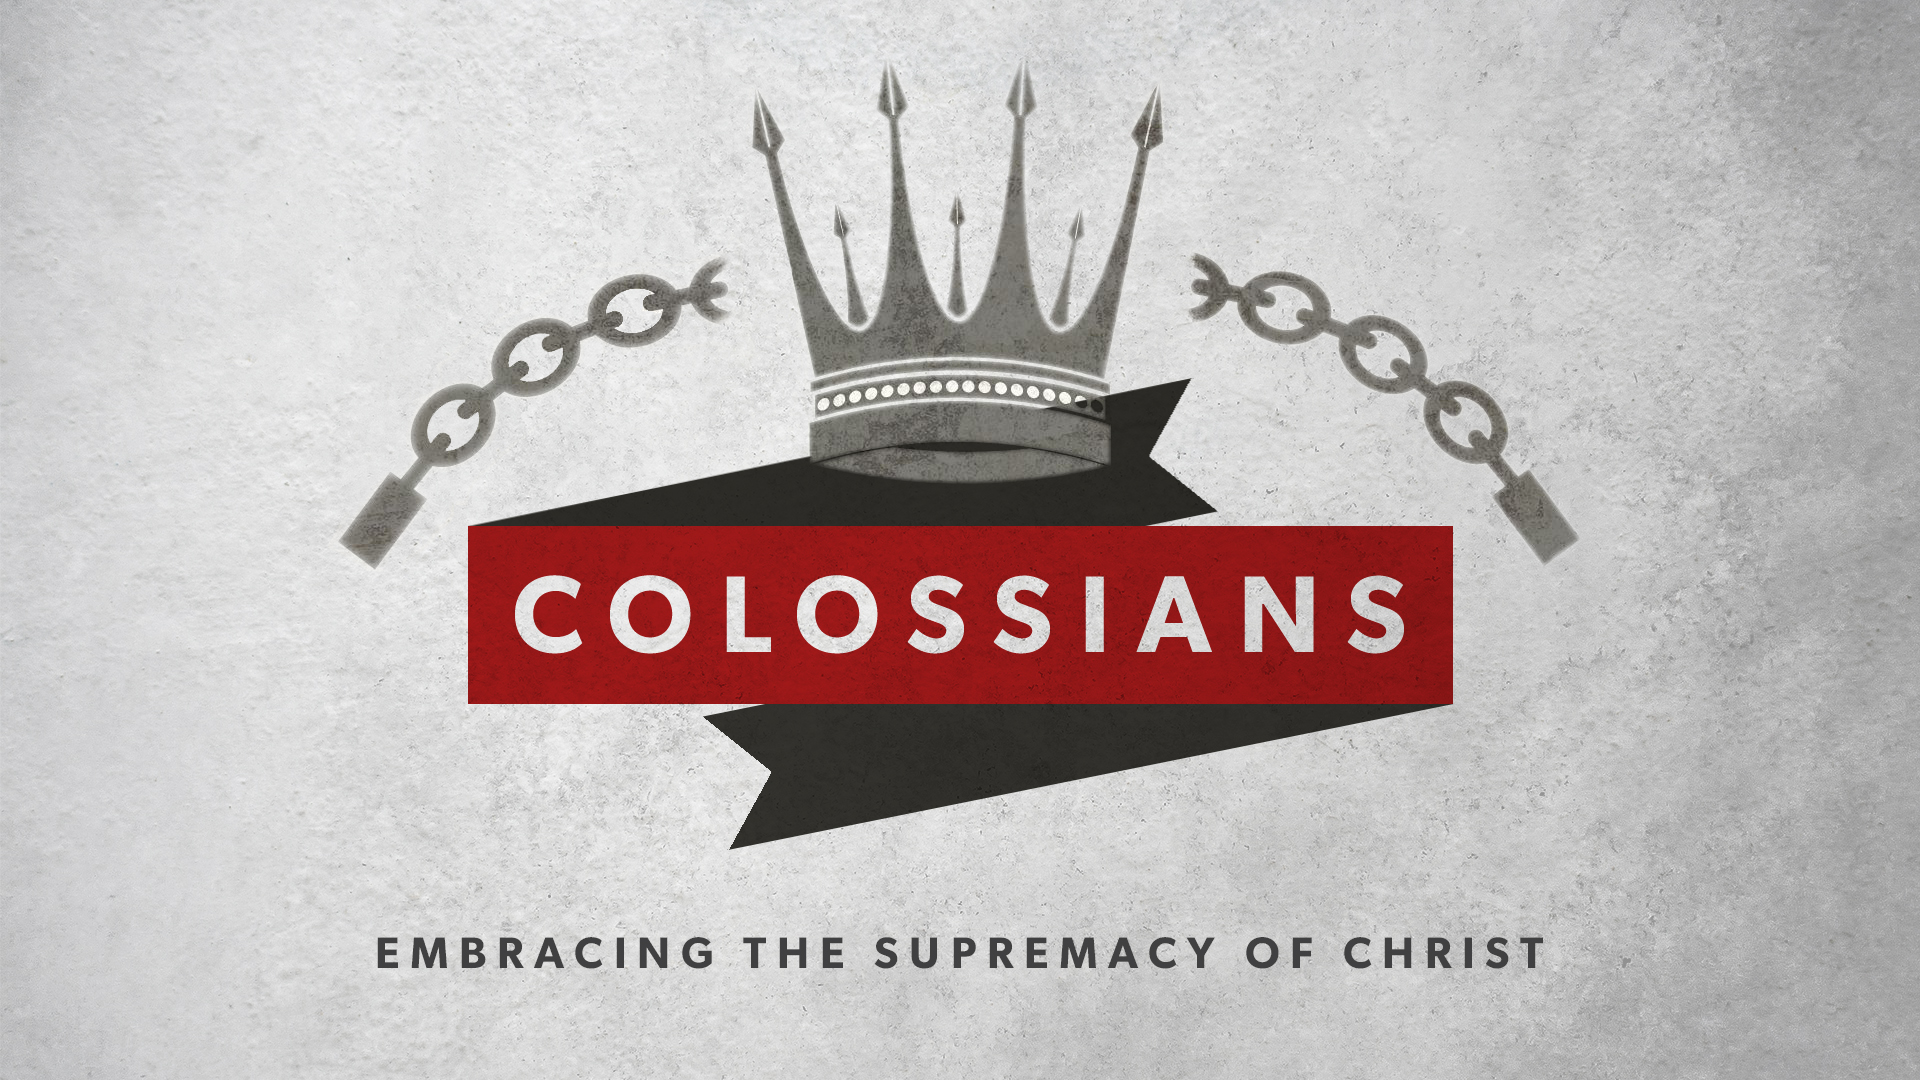 Colossians: Embracing the Supremacy of Christ